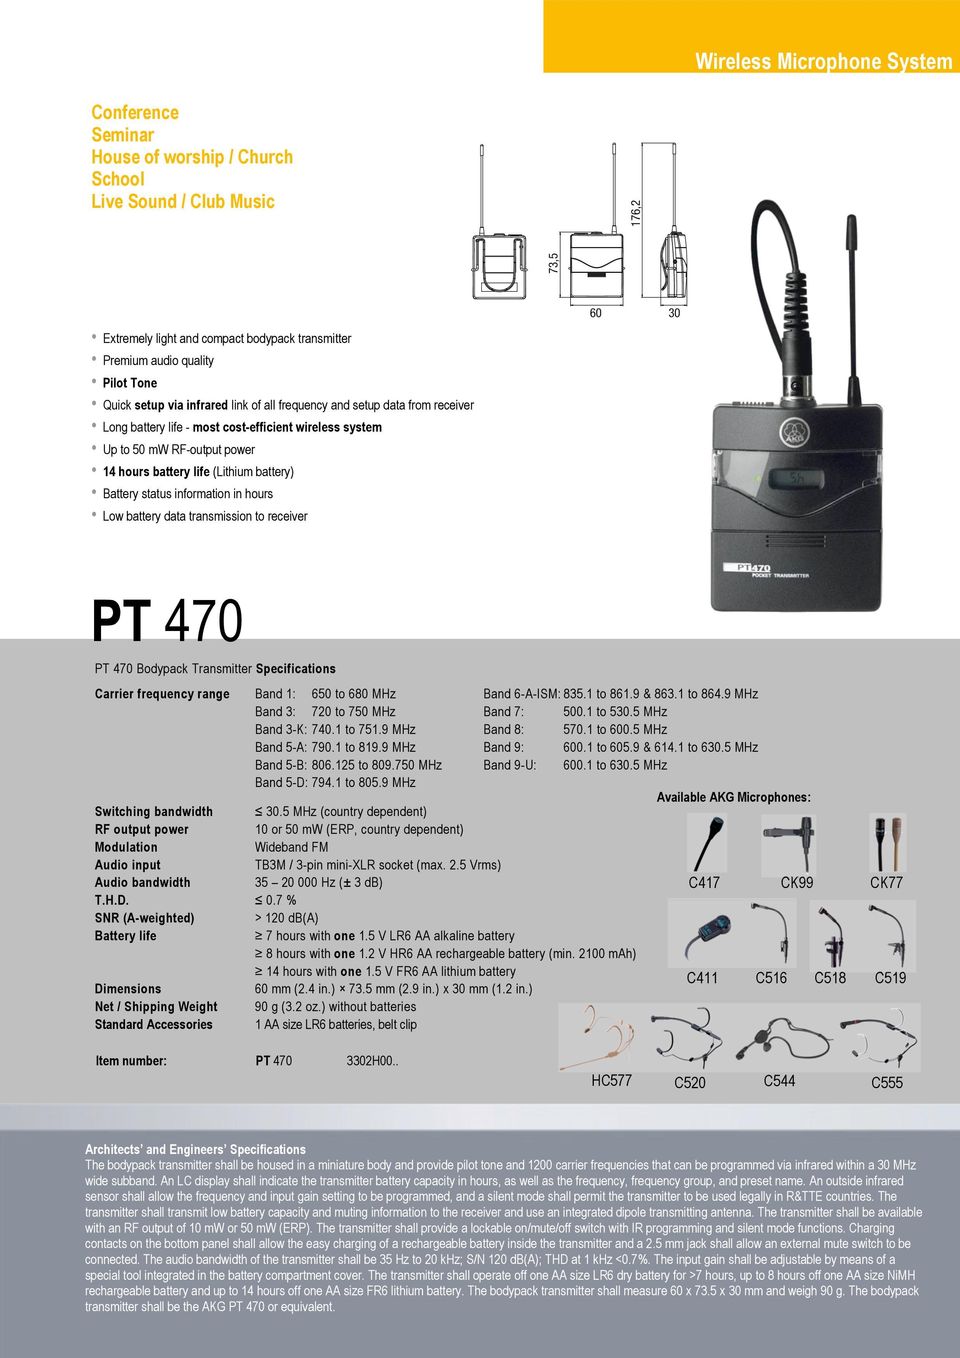 battery) Battery status information in hours Low battery data transmission to receiver PT 470 PT 470 Bodypack Transmitter Specifications Carrier frequency range Band 1: 650 to 680 MHz Band 6-A-ISM: